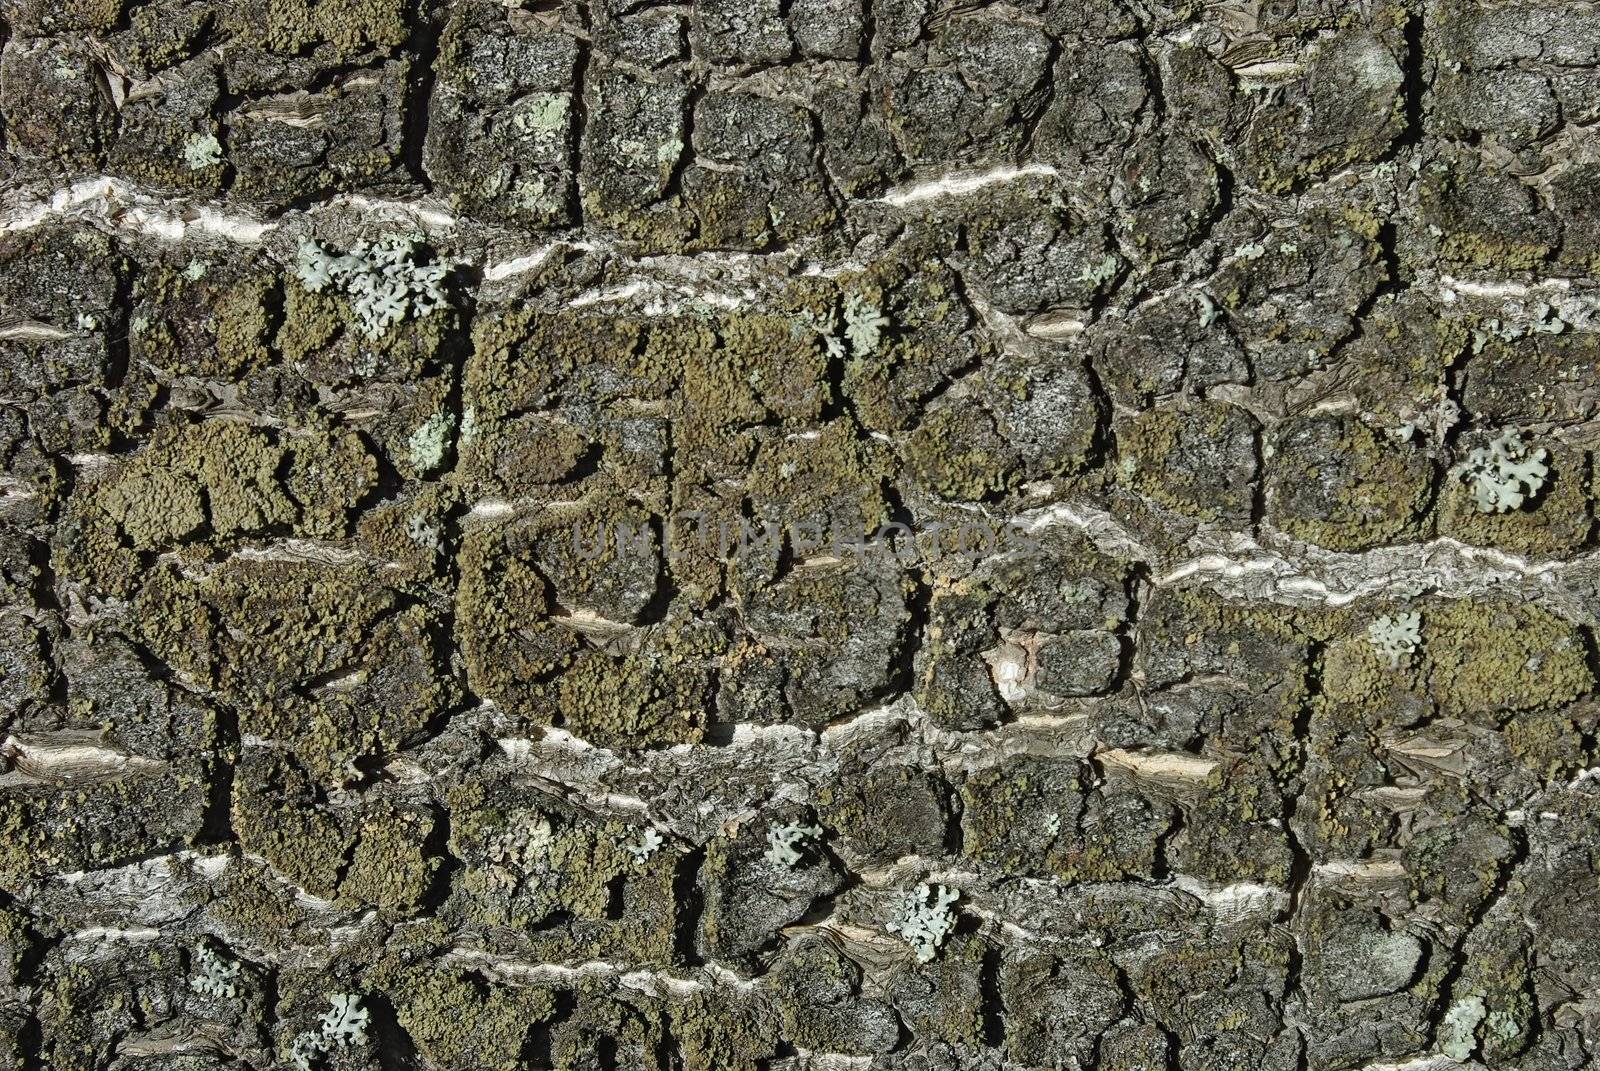 Closeup of old weathered cracked tree bark as background